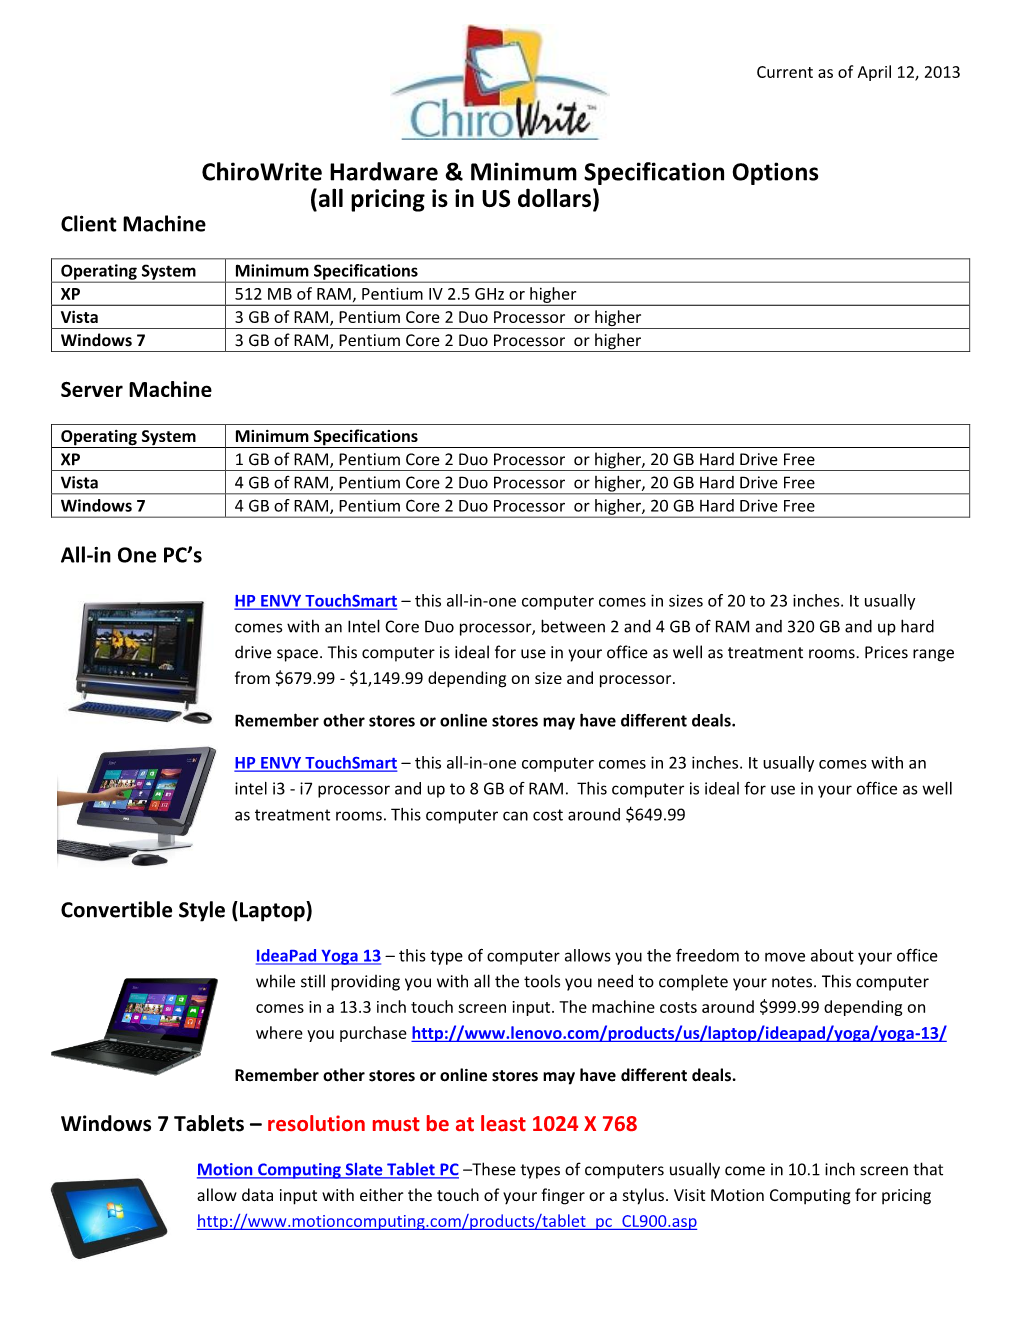 Chirowrite Hardware & Minimum Specification Options (All Pricing Is in US Dollars)